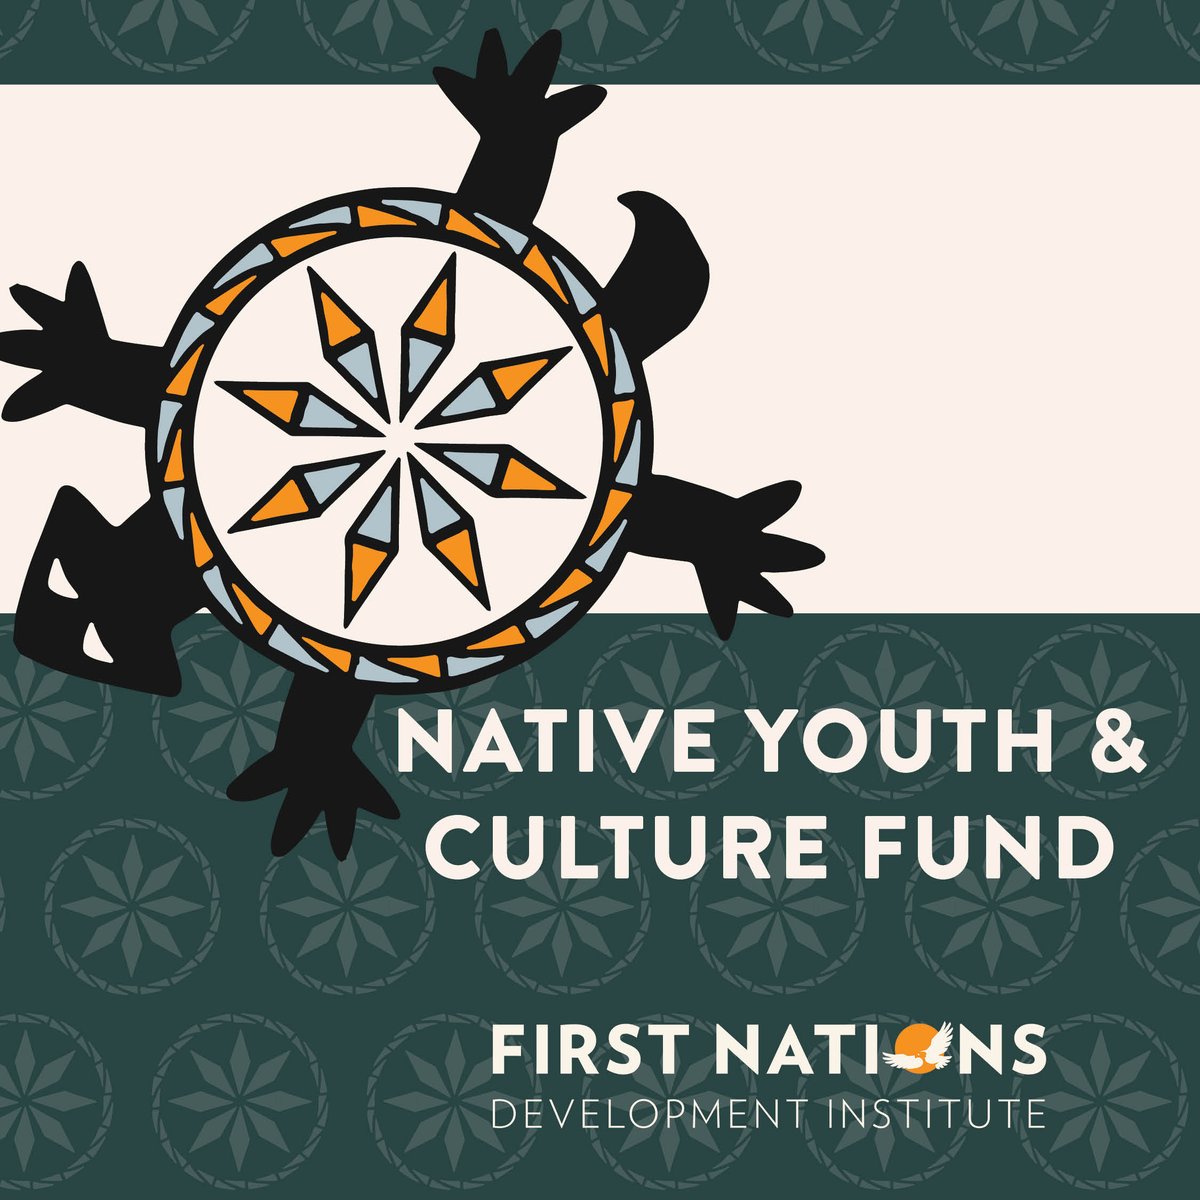 Apply for our Native Youth & Culture Fund grant opportunity! We will award grants from $20-60k to #NativeYouth programs focused on leadership and intergenerational knowledge. Apply by 6/5: bit.ly/3wrDGIY

Tune in Monday 5/13 for a Q&A webinar: bit.ly/3PfrNfp